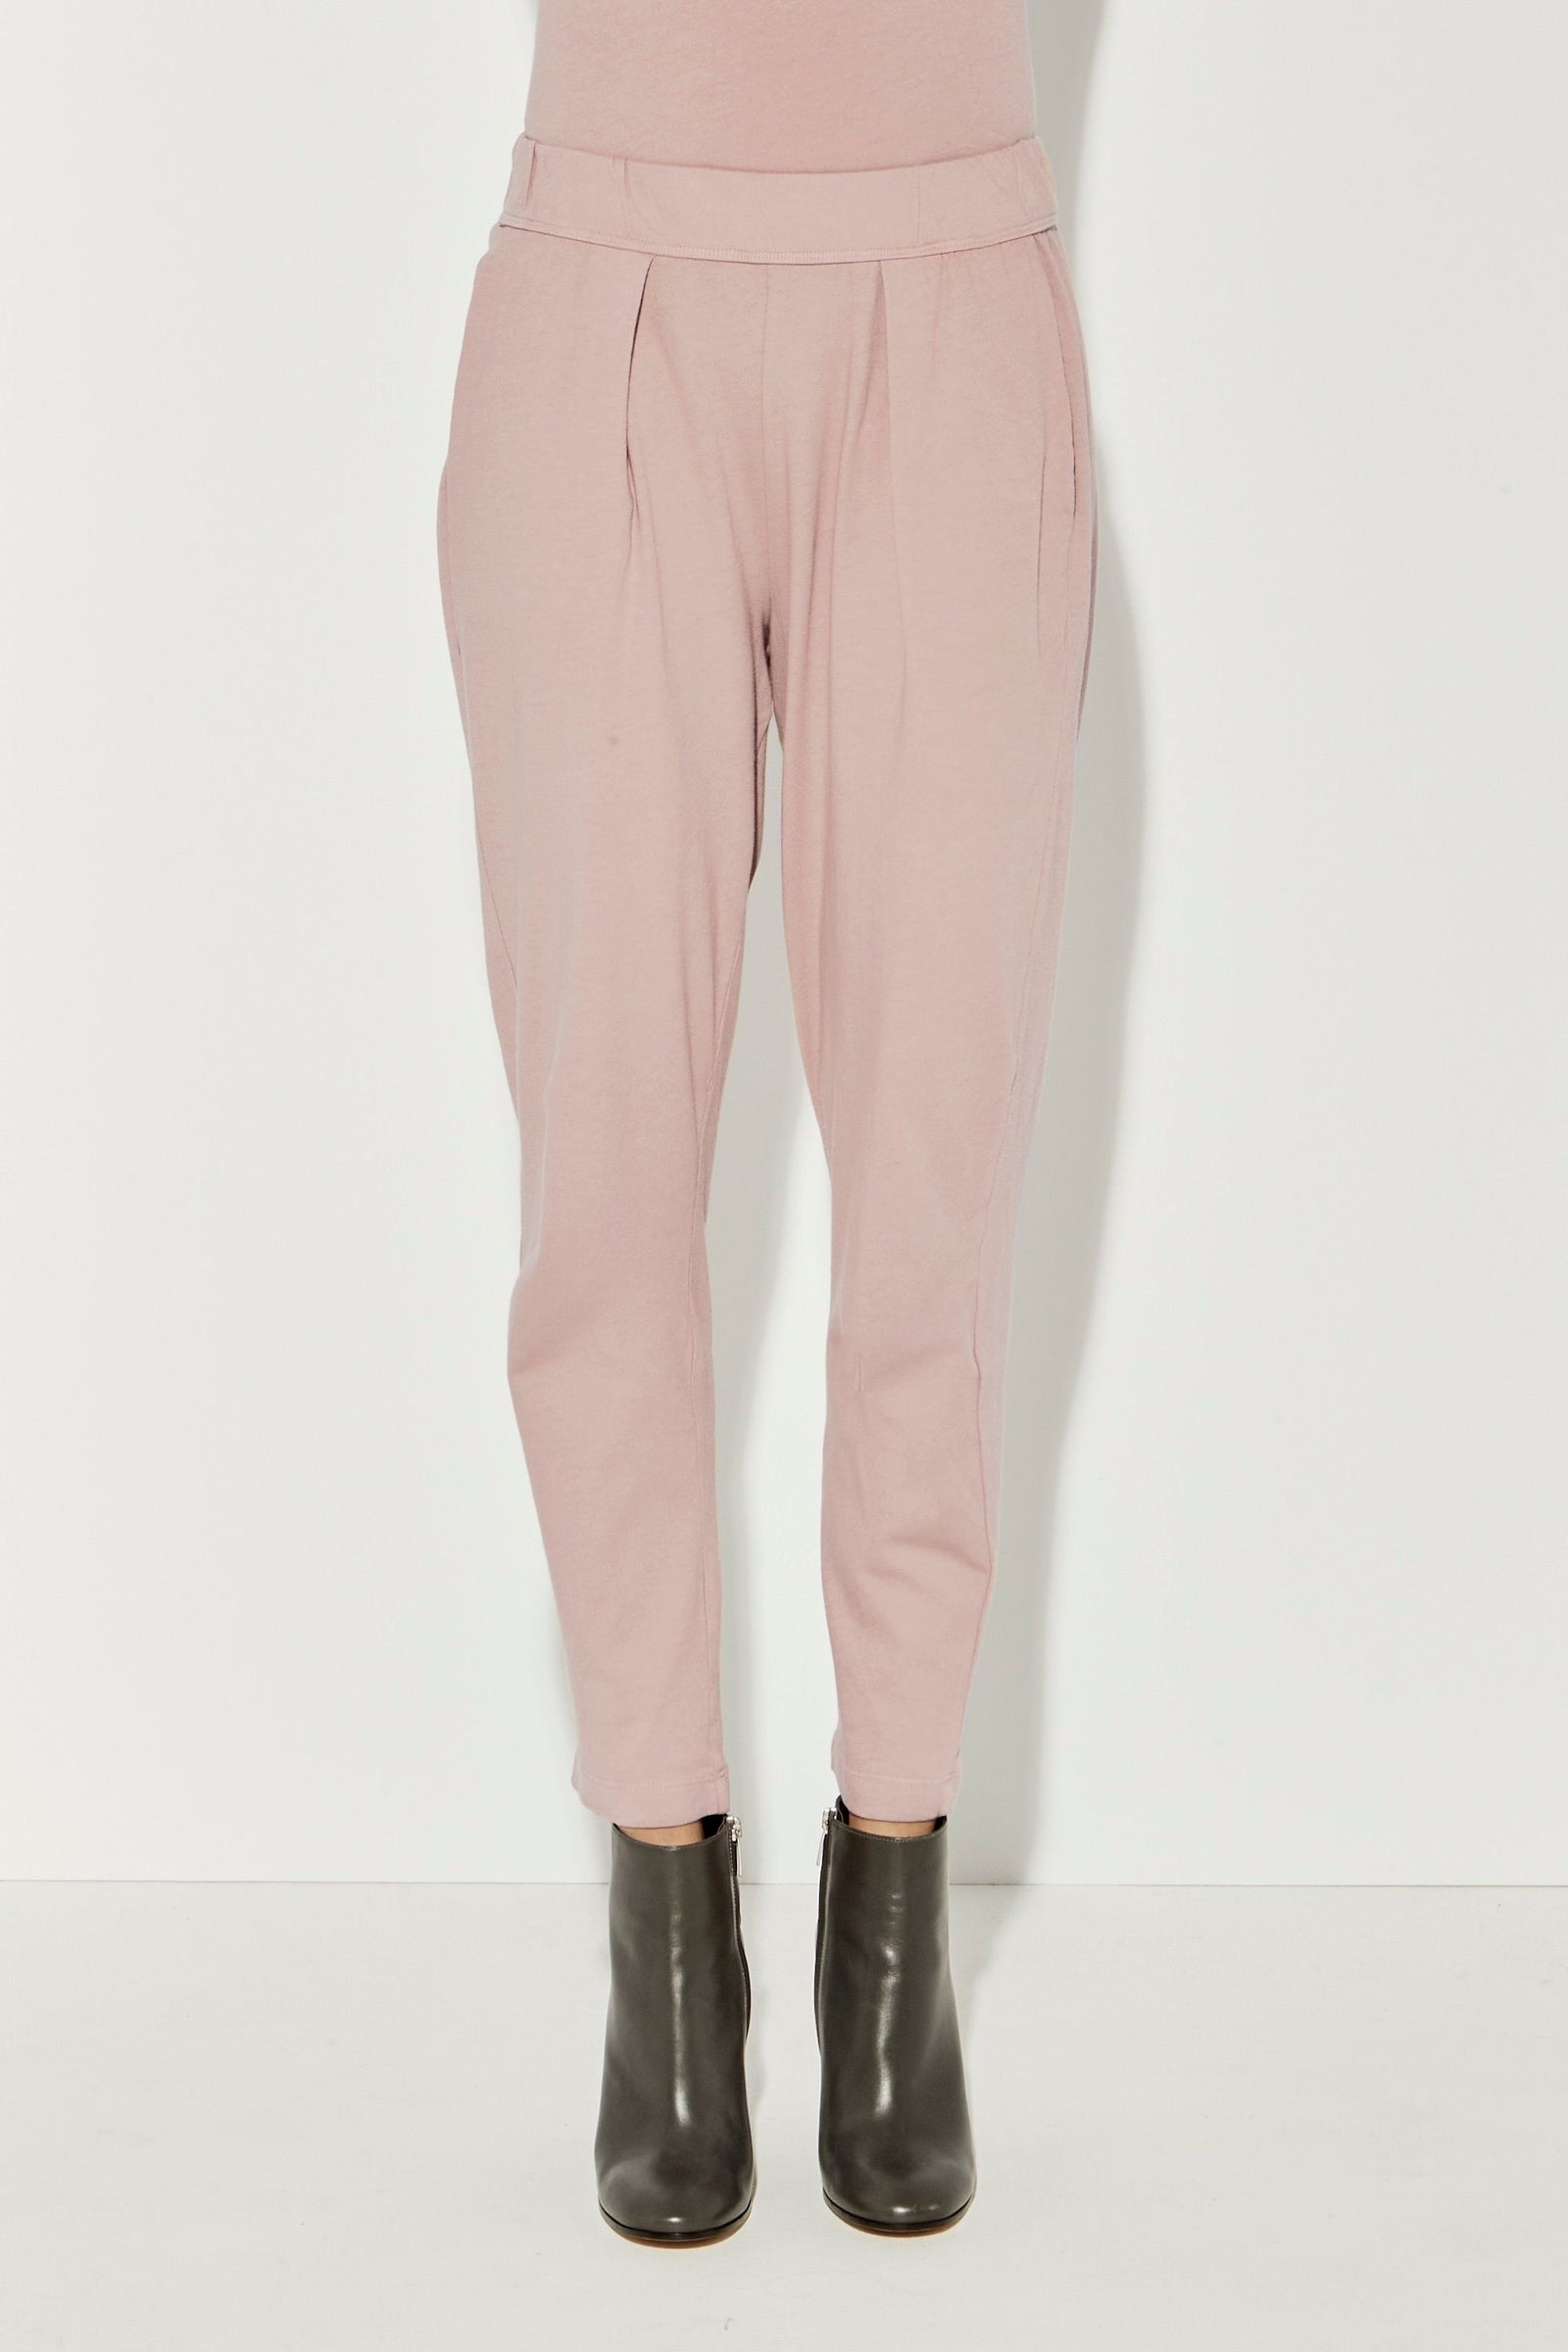 Petal Pink Classic Jersey Easy Pant Front Close-Up View